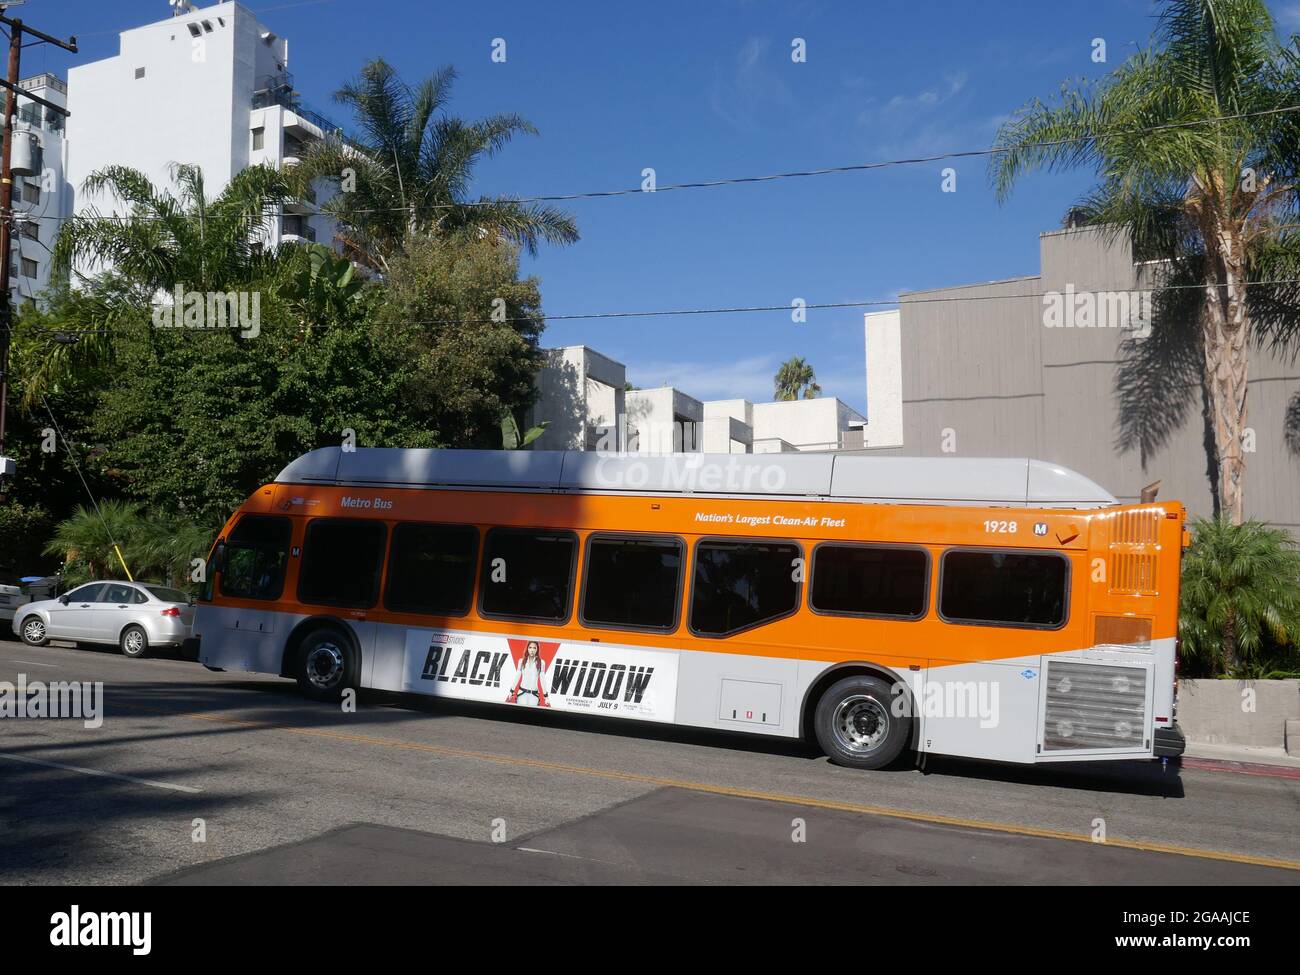 West Hollywood, California, USA 29th July 2021 A general view of atmosphere of Black Widow Scarlett Johansson Bus on July 29, 2021 in West Hollywood, California, USA. Photo by Barry King/Alamy Stock Photo Stock Photo